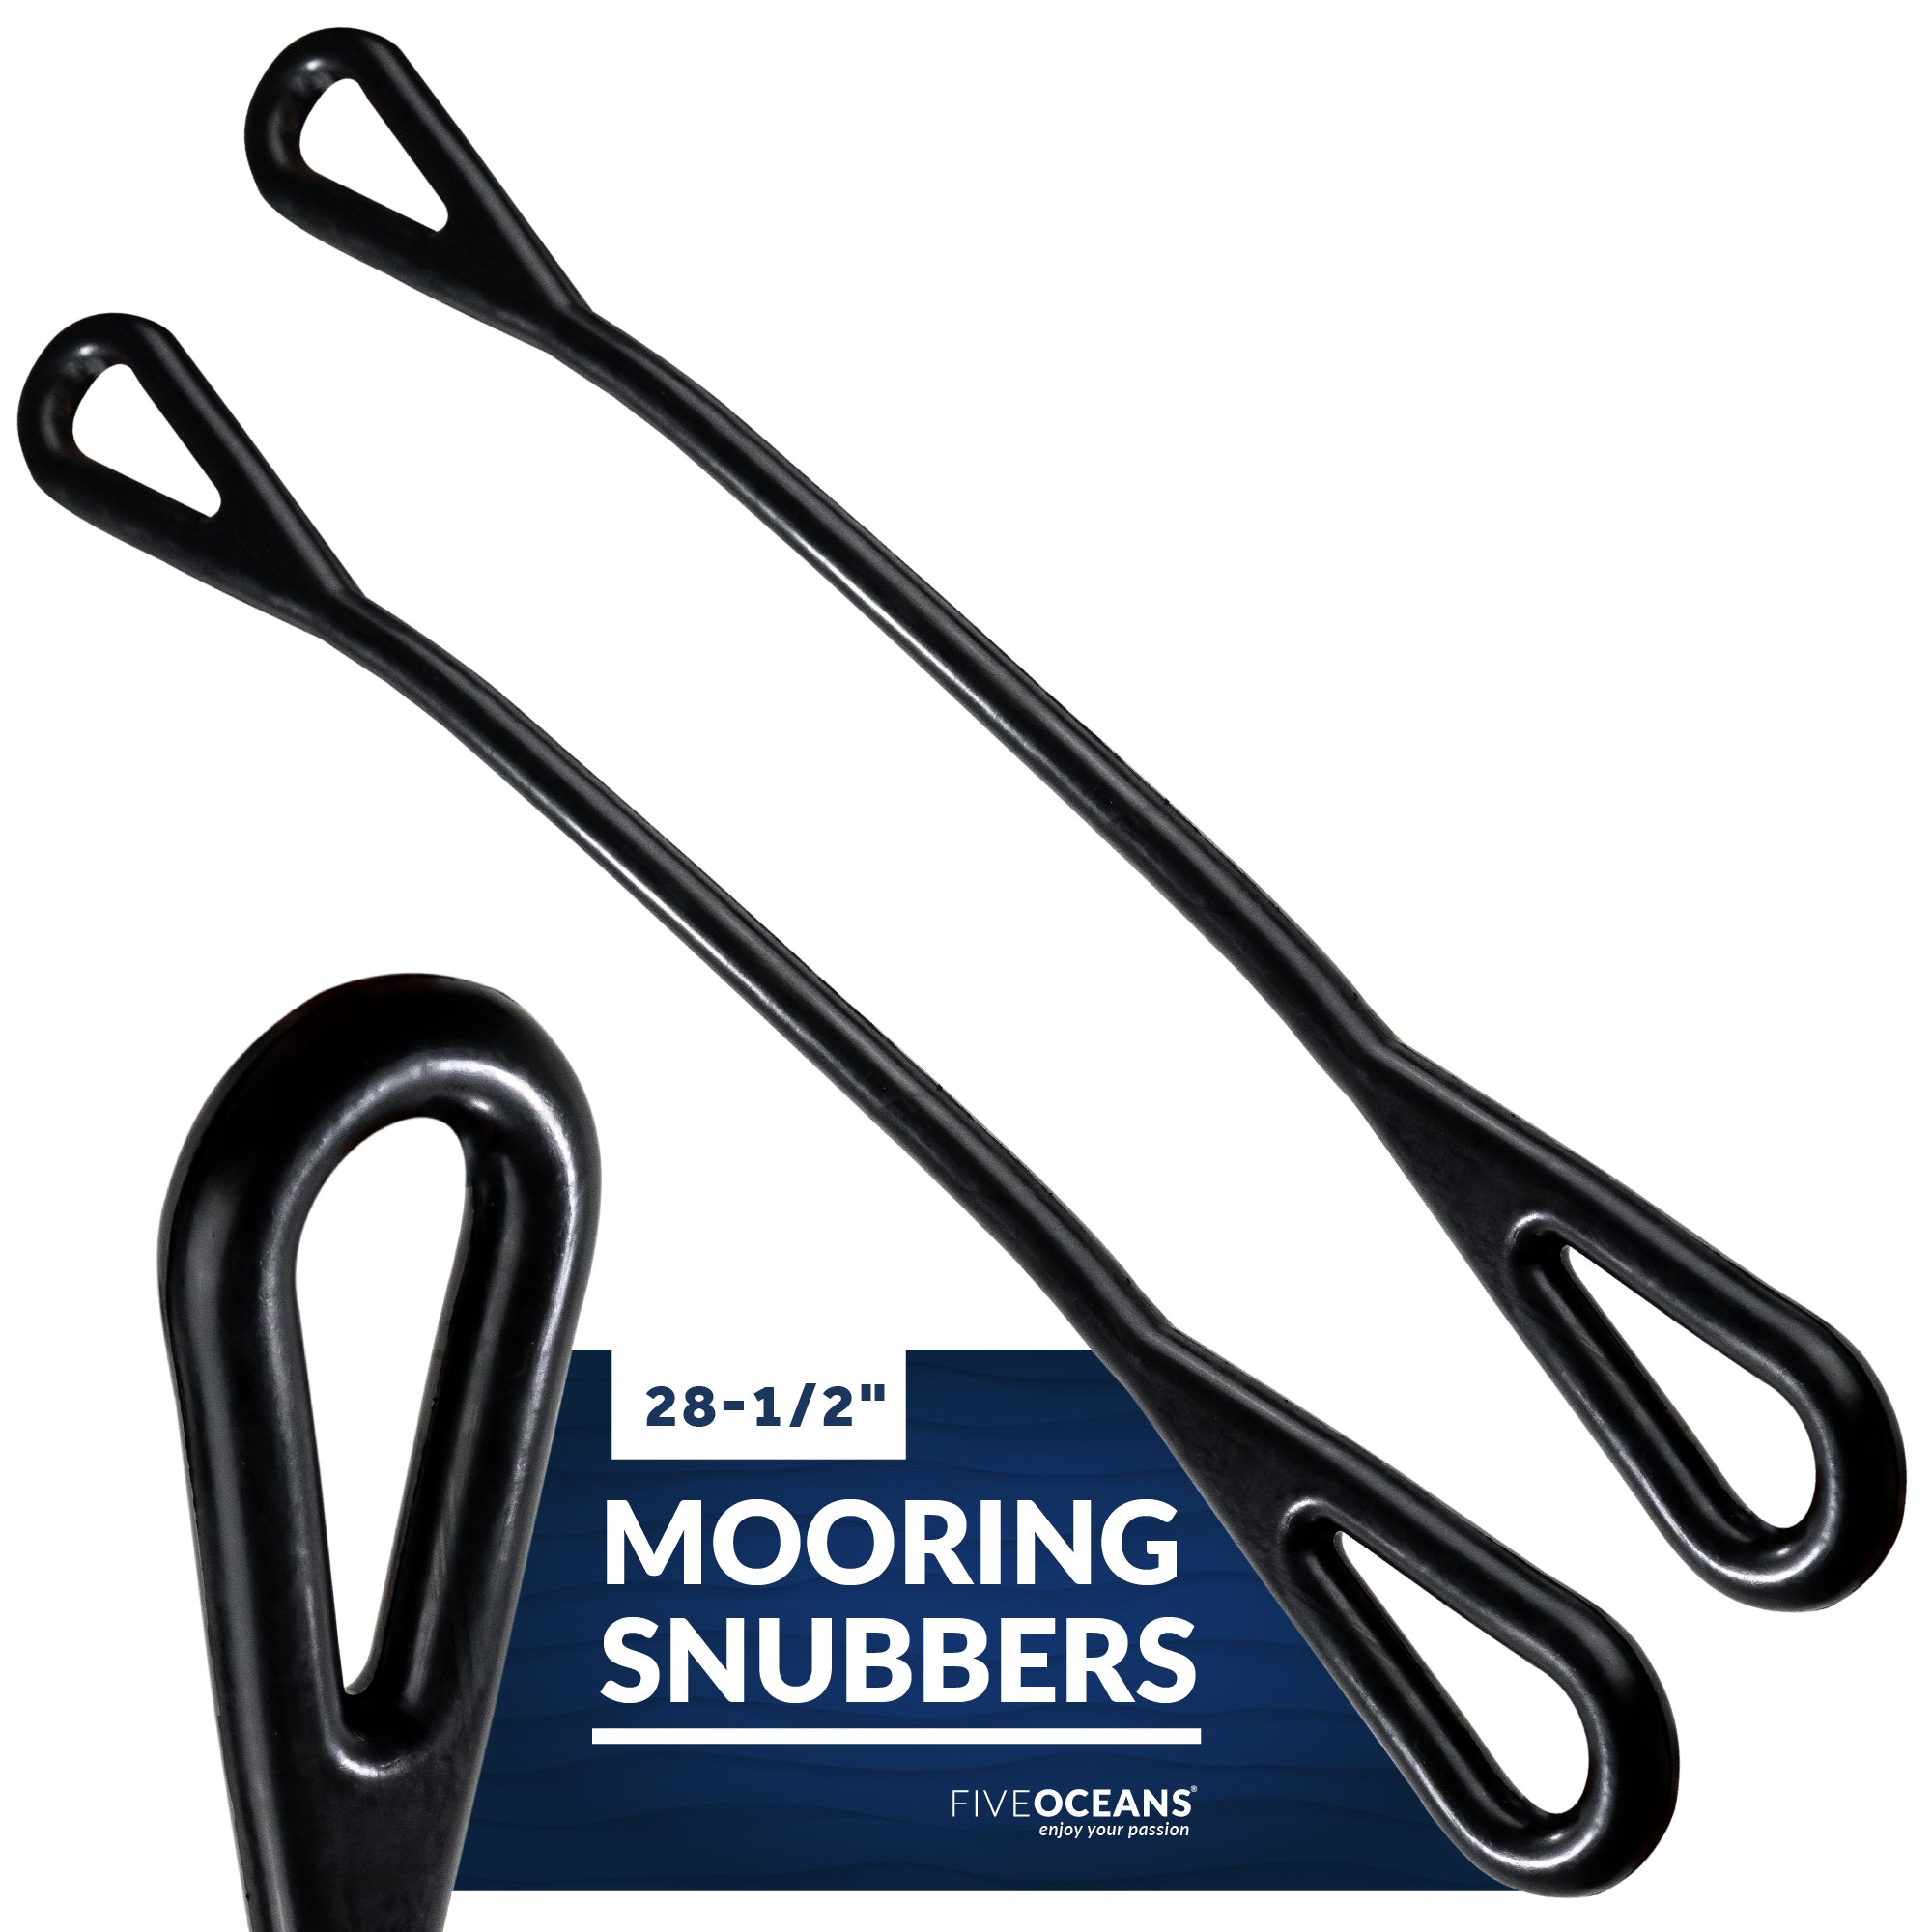 Boat Rubber Mooring Snubber, 28-1/2", 2-Pack - FO102-M2